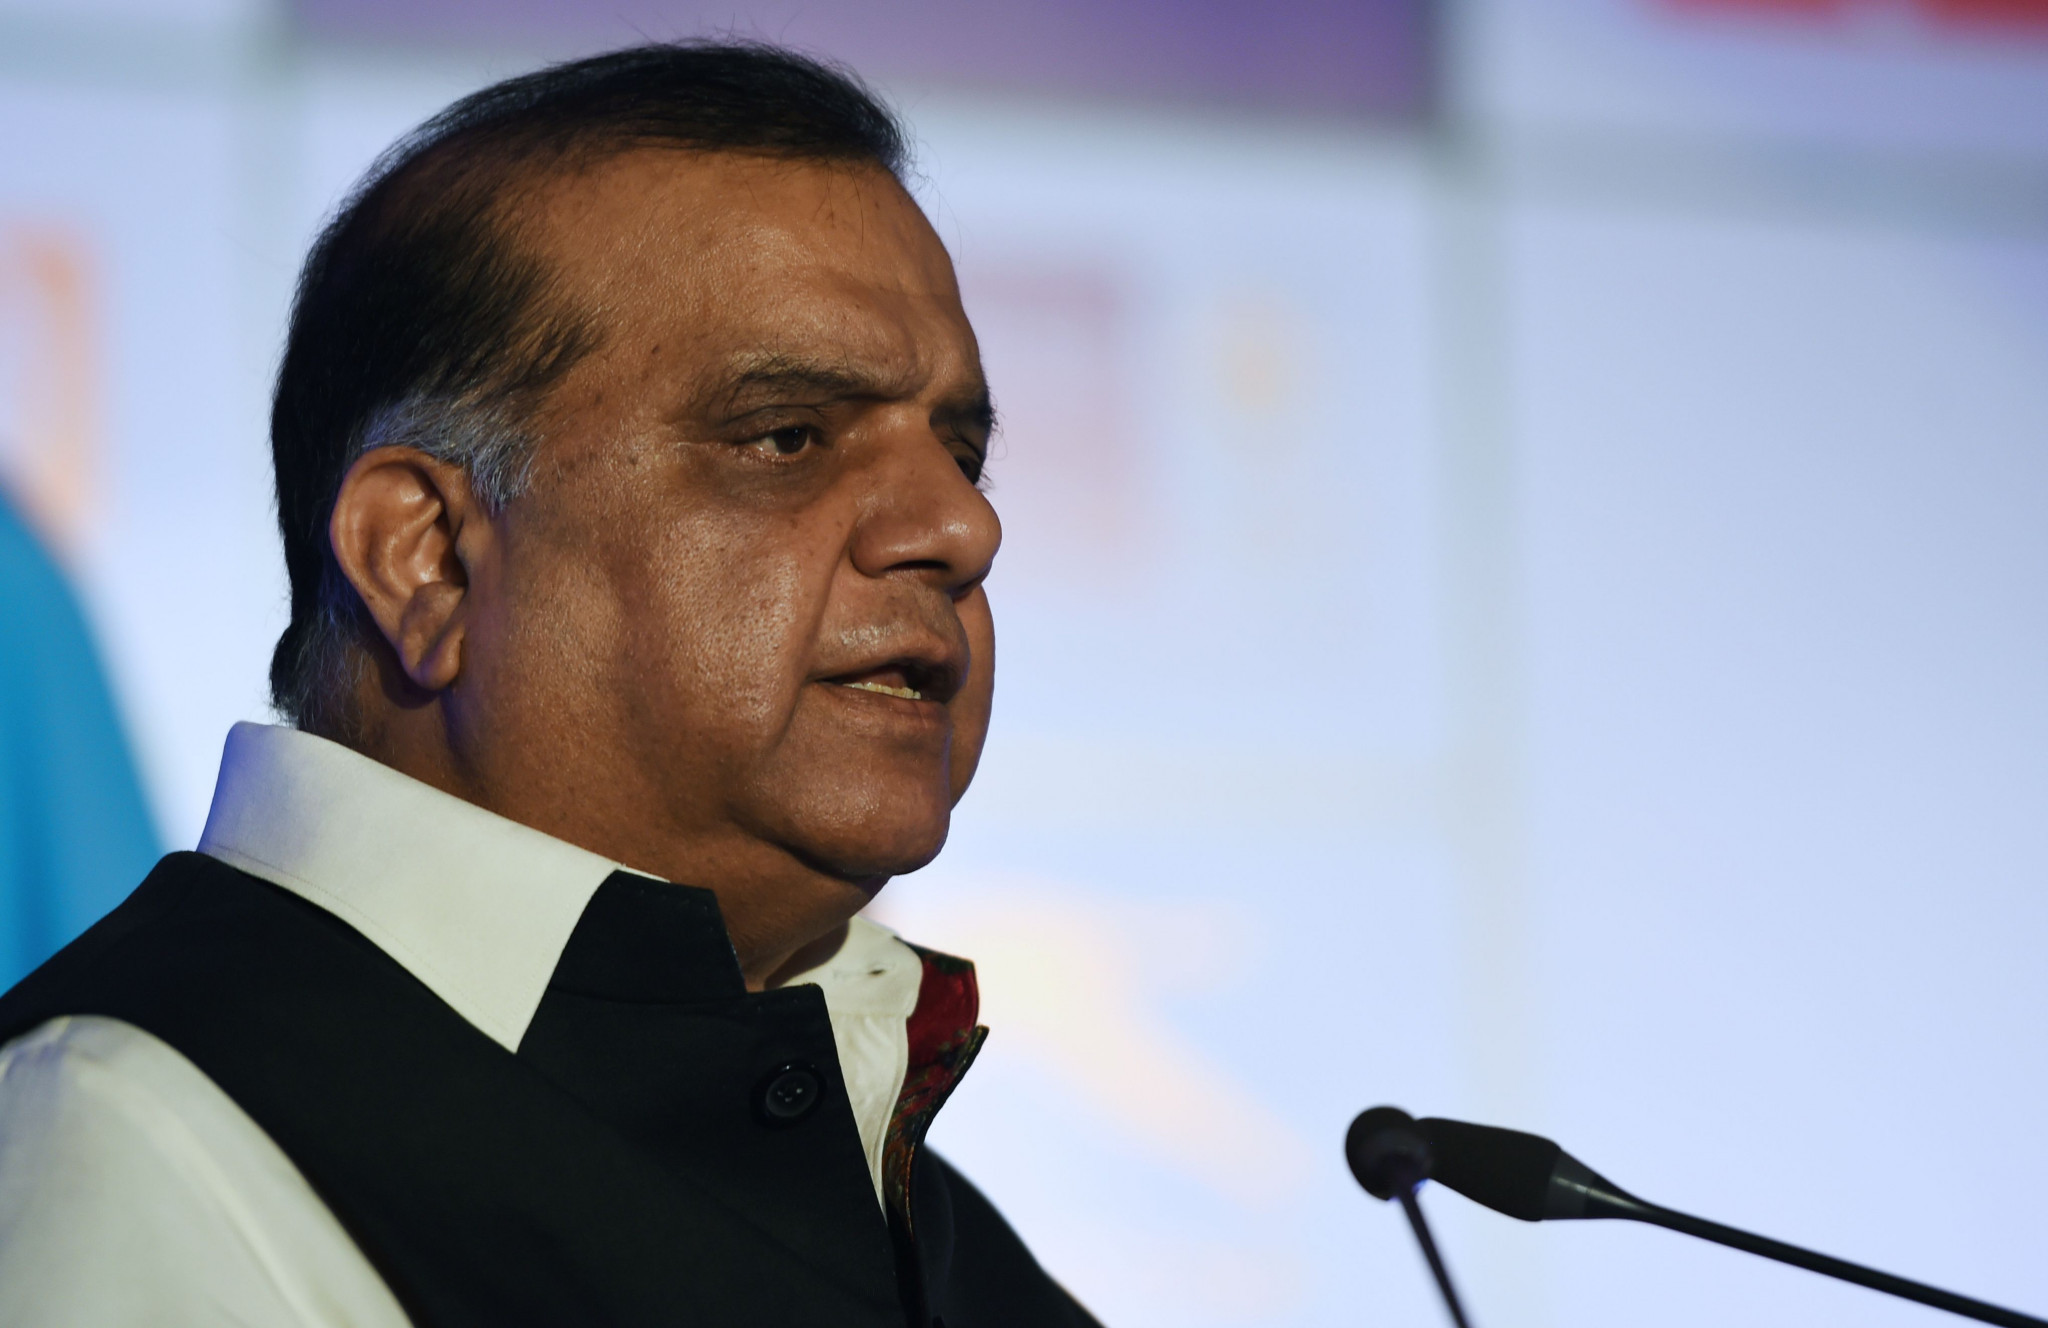 IOA President Narinder Batra has criticised the country's Sports Ministry ©Getty Images